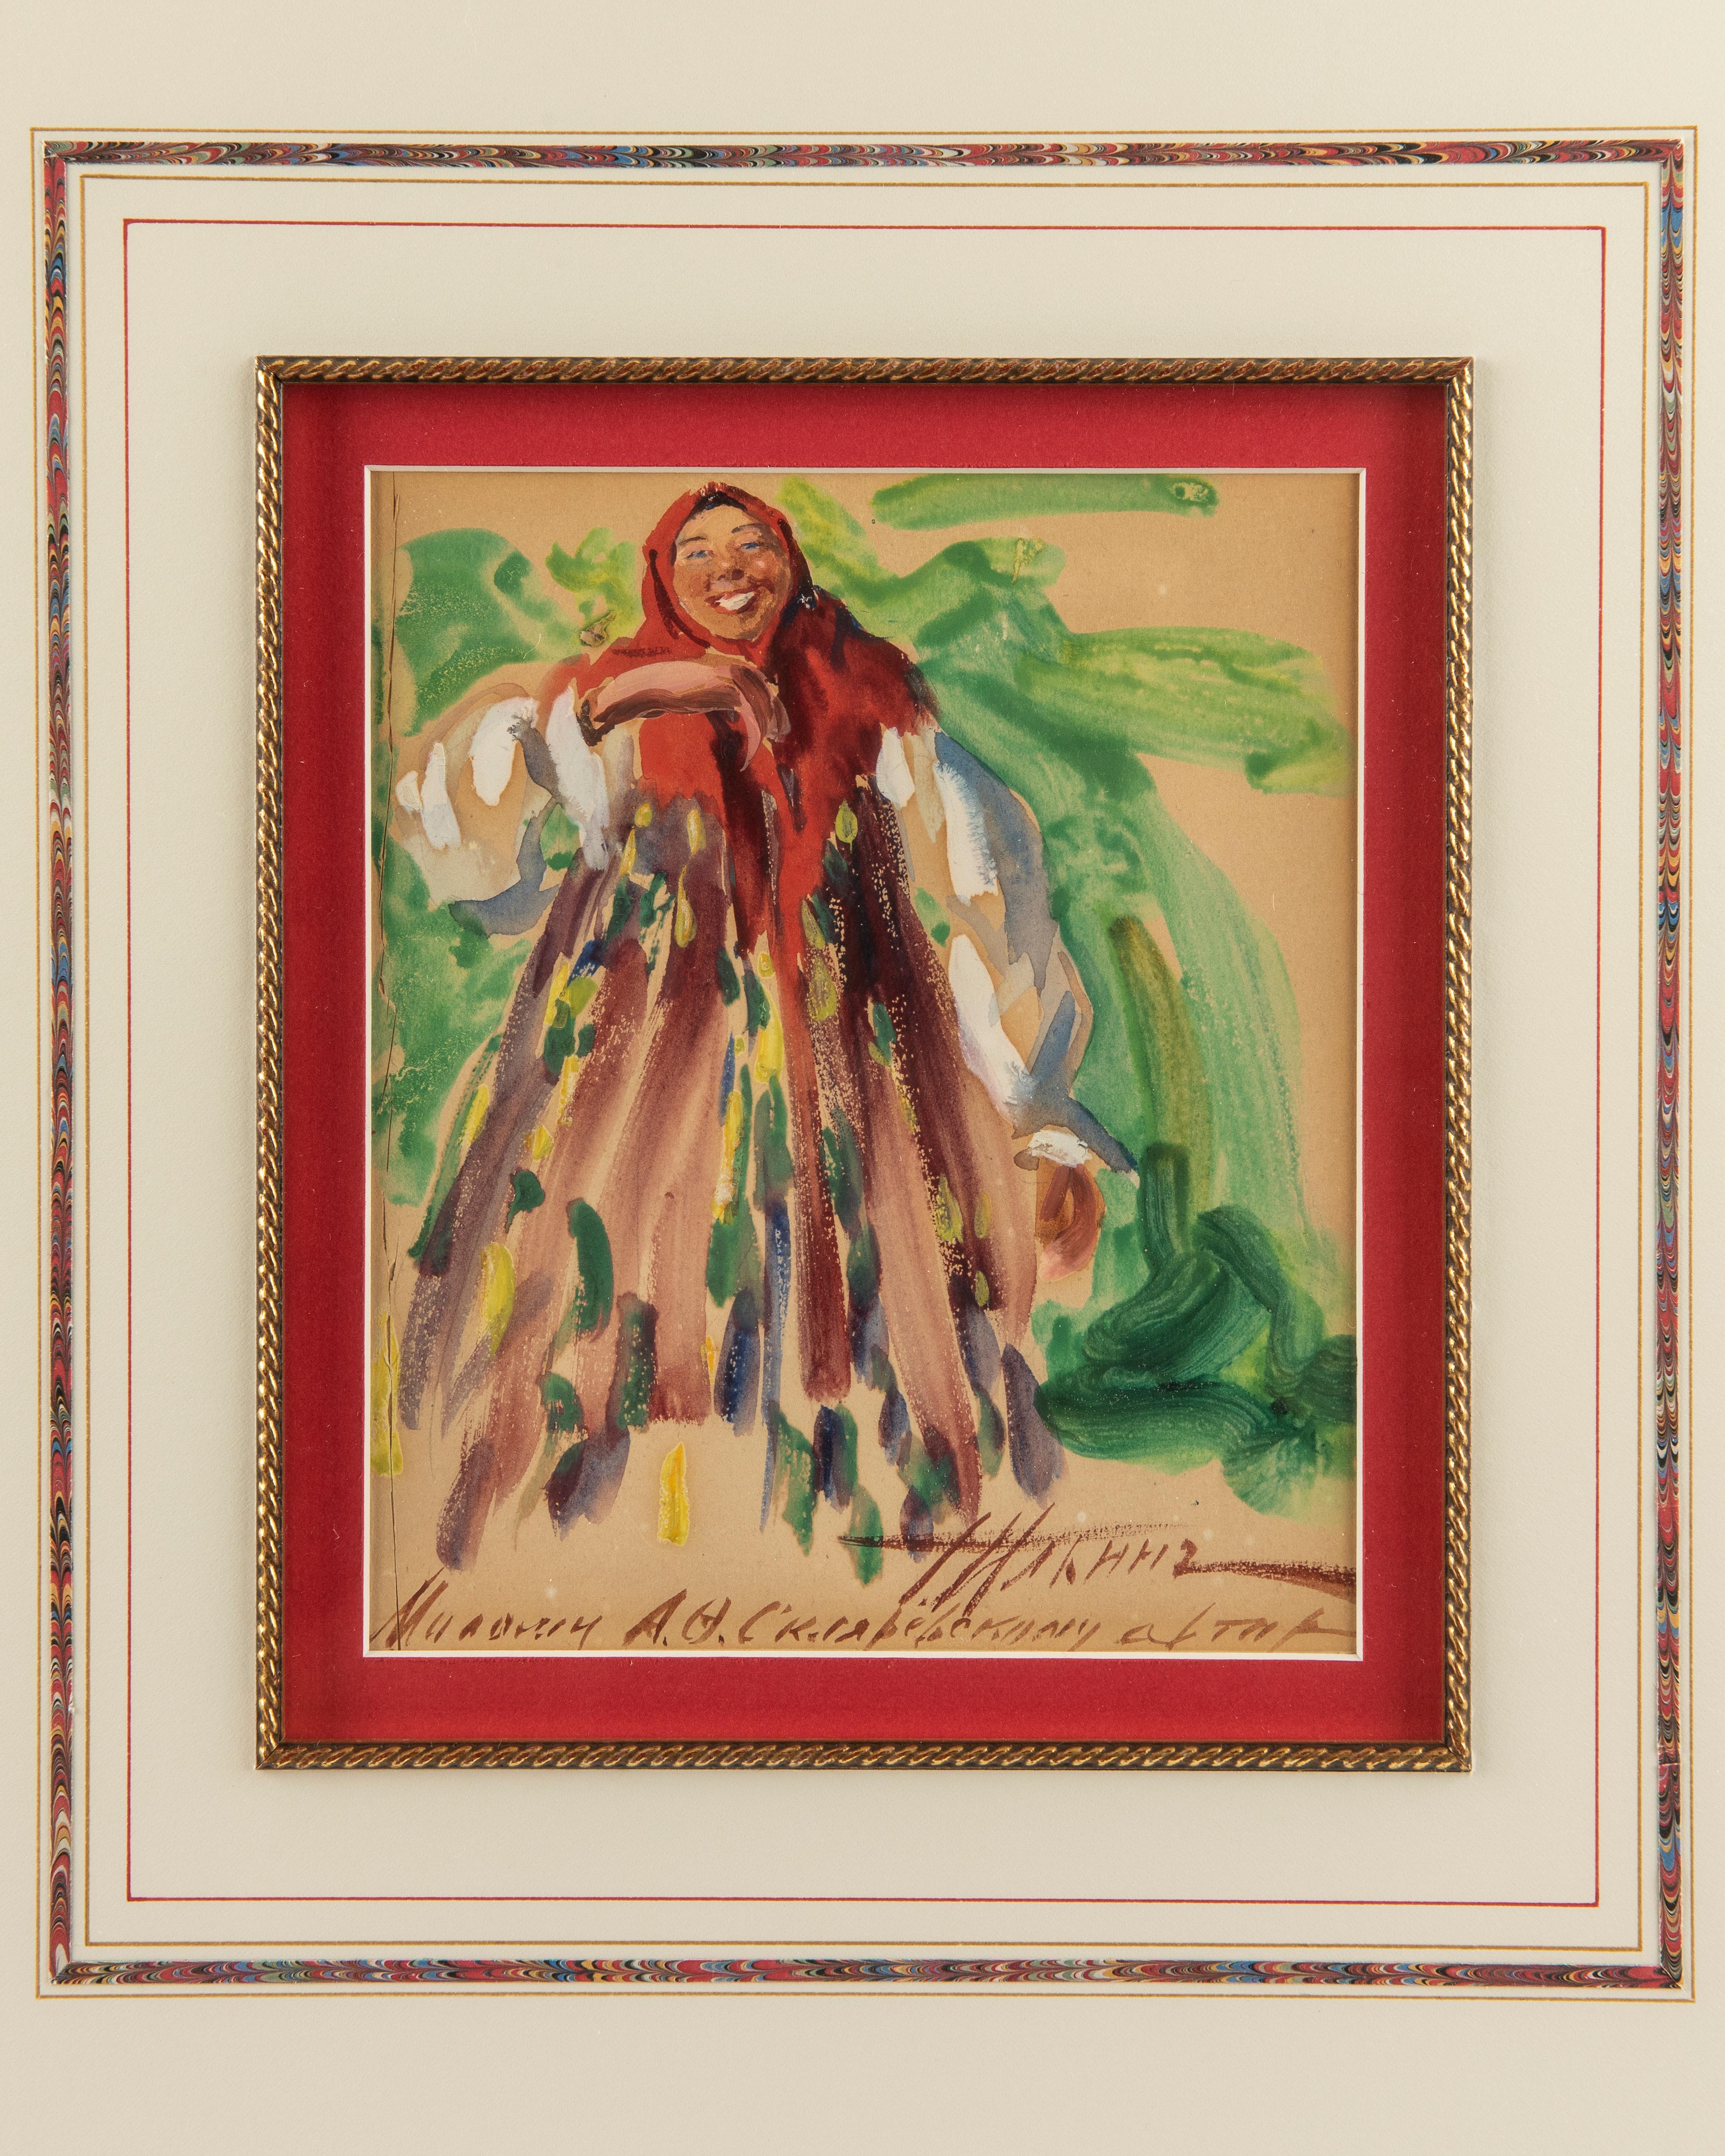 Laughing Peasant Woman
Signed in Cyrillic T. Il’ich, l.r. and inscribed To Dear A. F.Sklarevski...
Watercolor
Image size: 7 x 6 in. (17.8 x 15.2 cm.)
Framed: 18 1/2 x 17 1/4 in. (47 x 43.8 cm.)

Katurkin Timophiy Illich, 1887-1957

Katurking was a